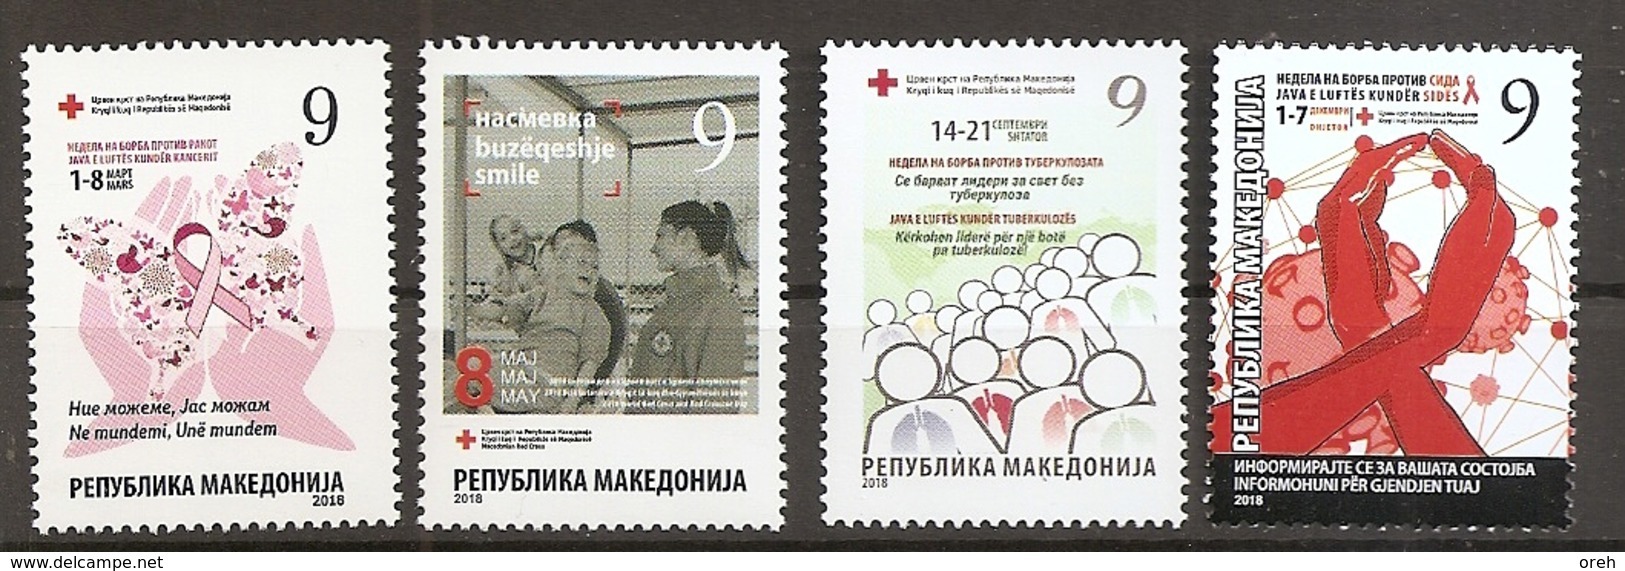 MACEDONIA 2018,COMPLETE,RED CROSS,SOLIDARITY,tuberculose,,ADITIONAL STAMPS,,,MNH - Red Cross